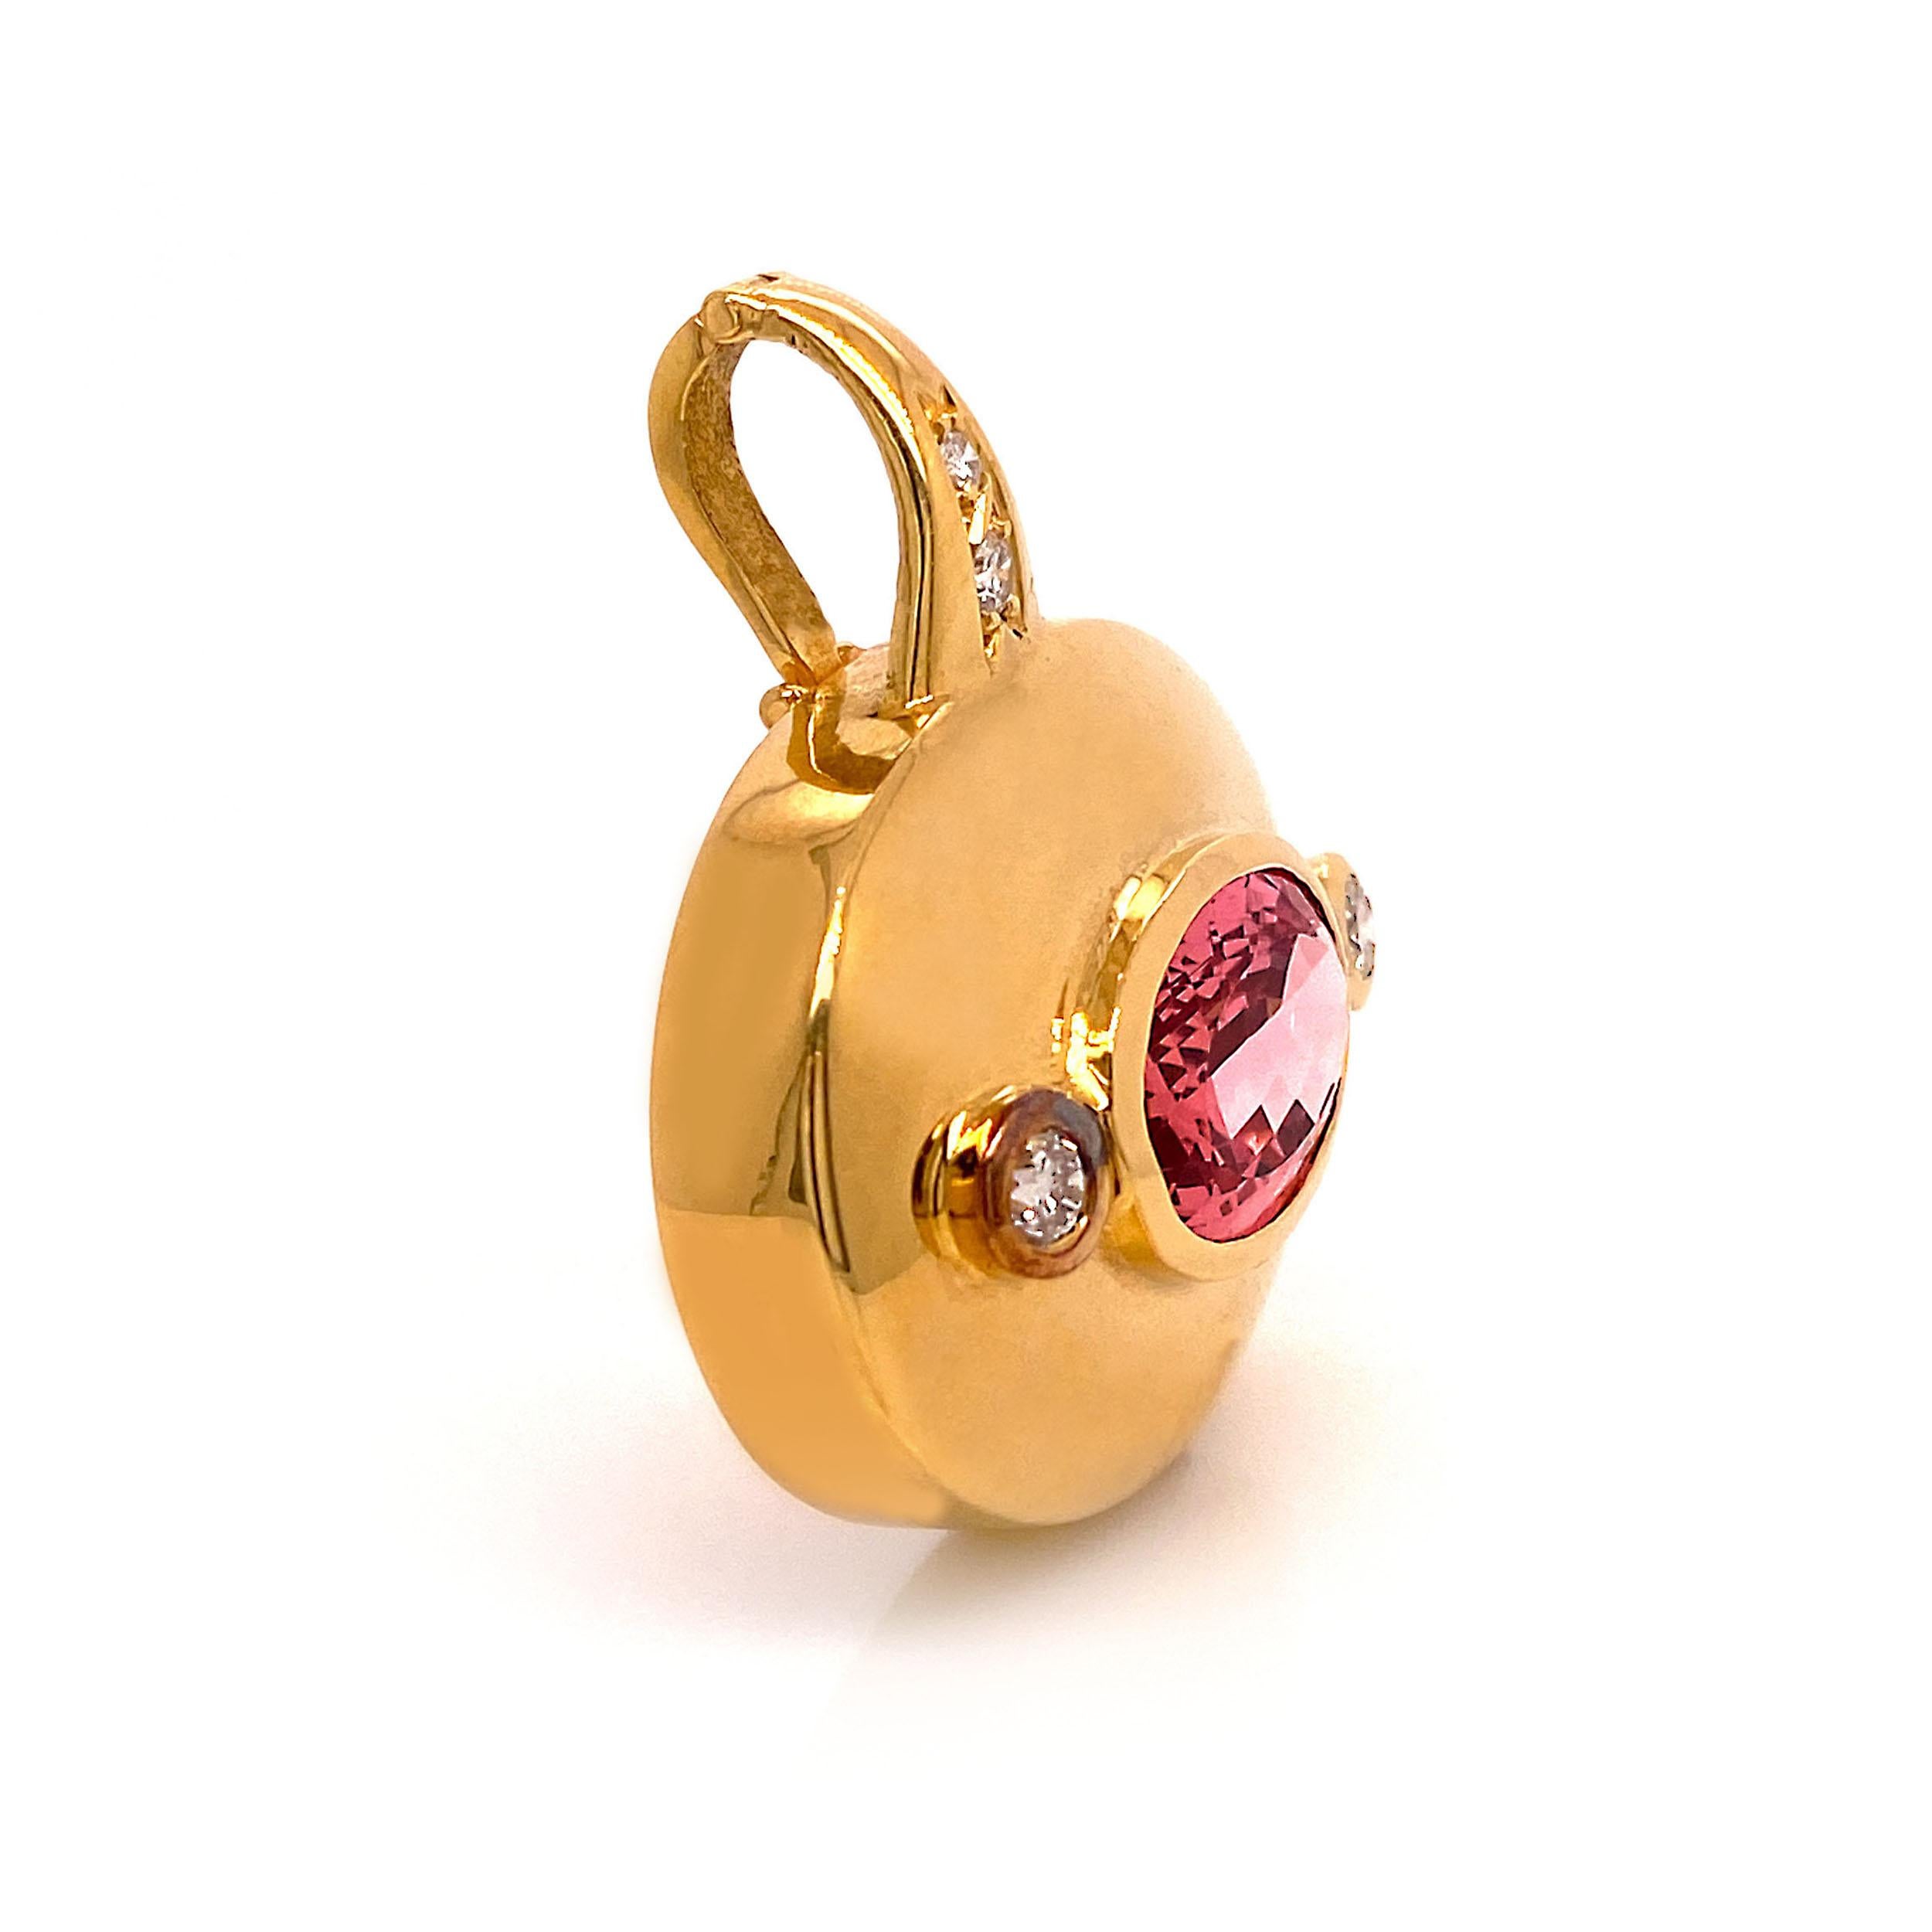 Oval Cut AJD 18K Gold Pendant with Pink Tourmaline and Diamonds